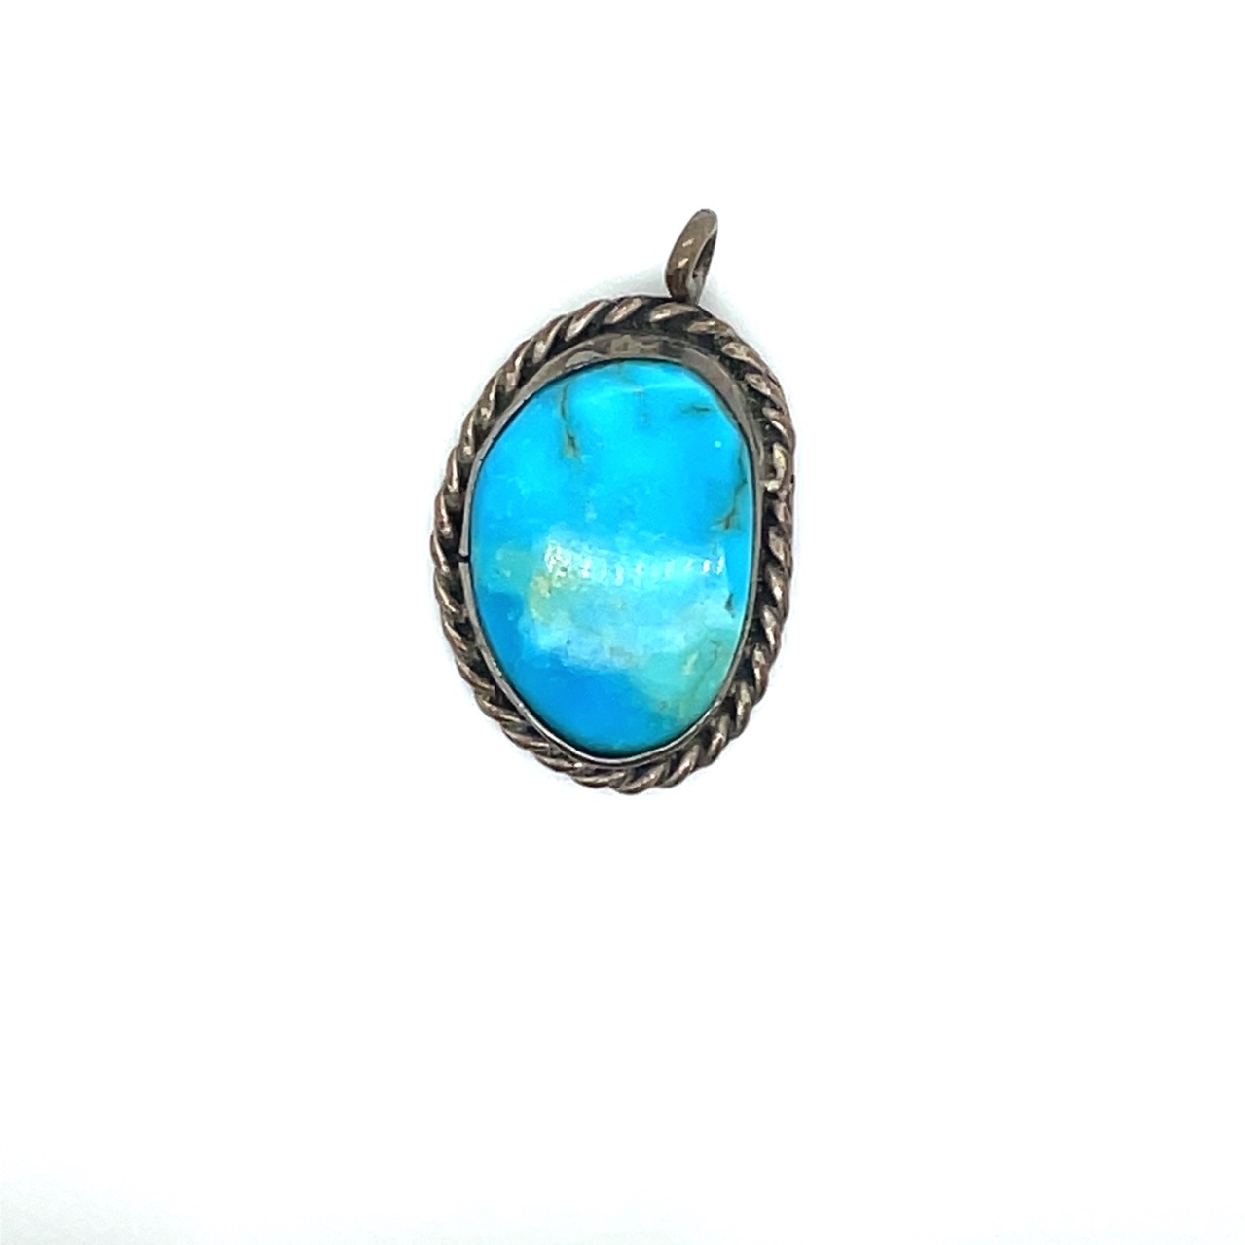 Small Sterling Silver and Turquoise Pendant with Twisted Rope Design 